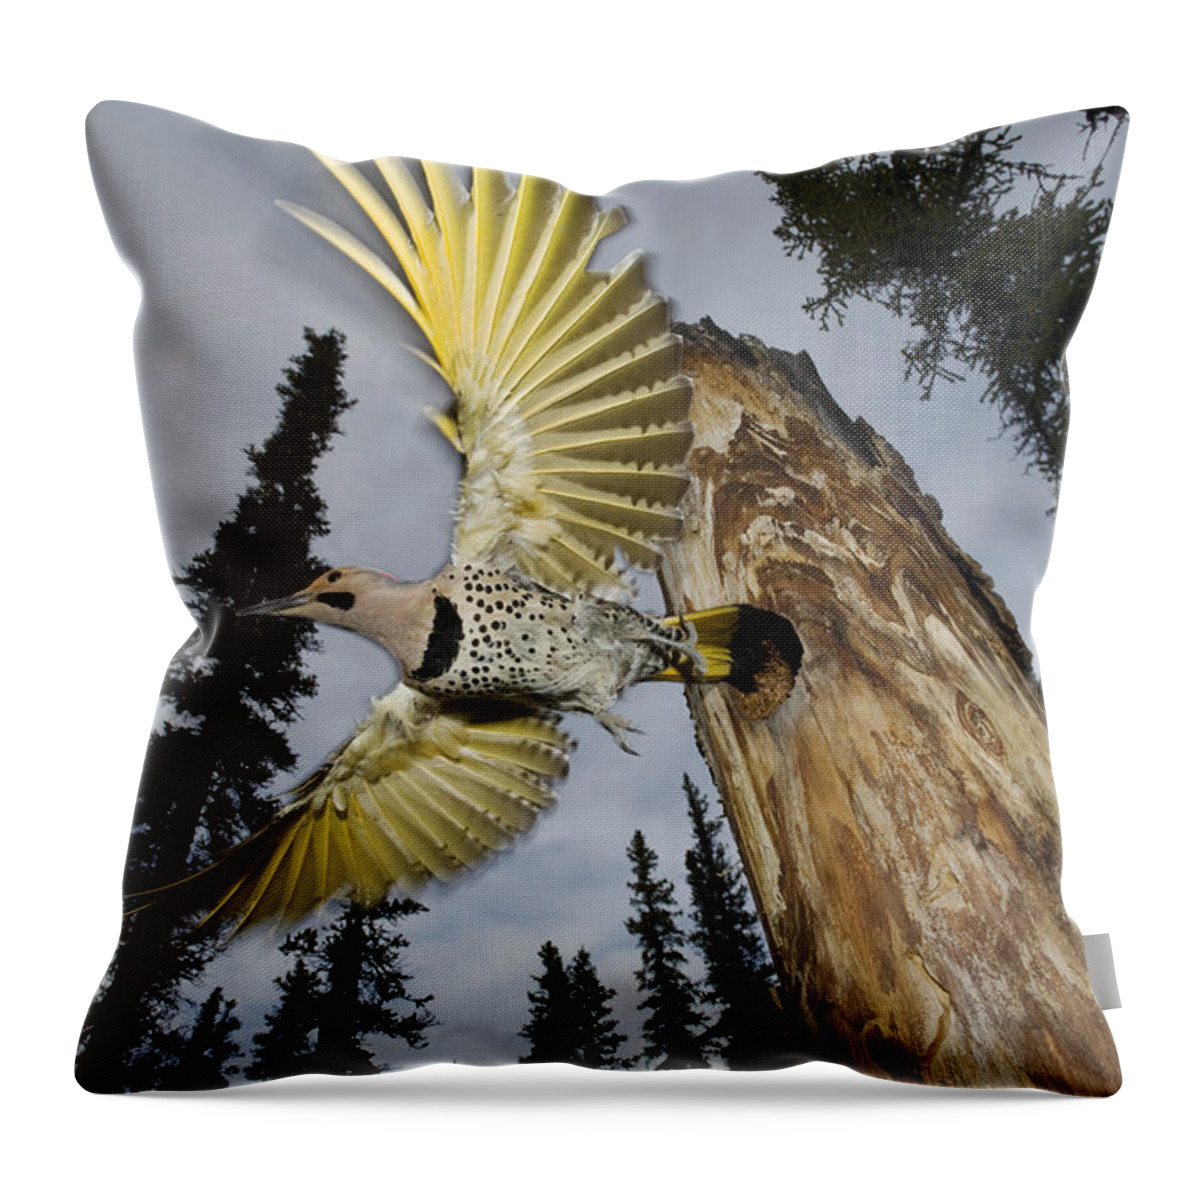 Michael Quinton Throw Pillow featuring the photograph Northern Flicker Leaving Nest Cavity by Michael Quinton